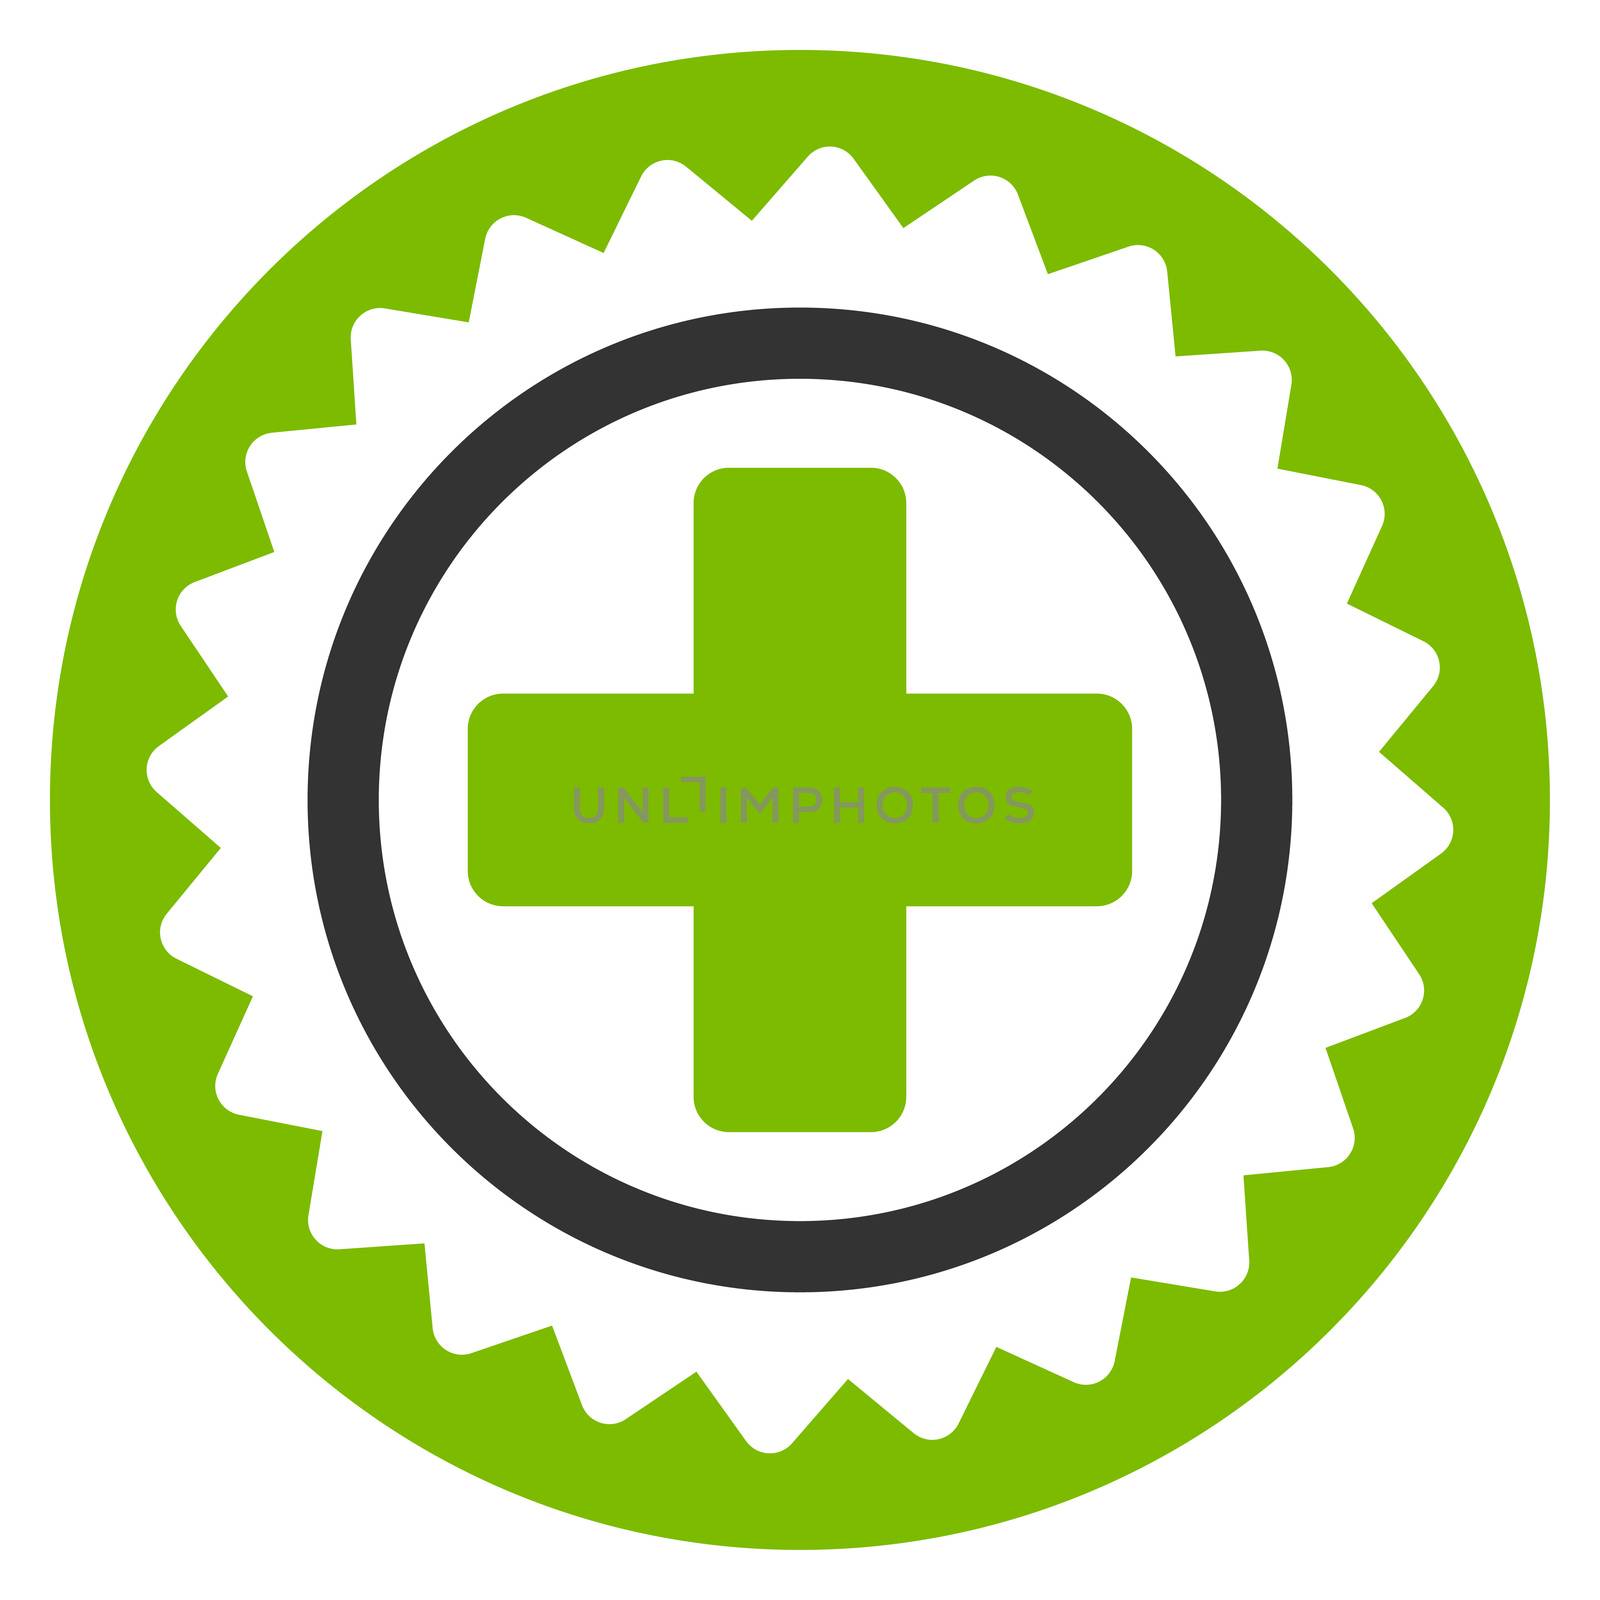 Medical Stamp raster icon. Style is bicolor flat symbol, eco green and gray colors, rounded angles, white background.